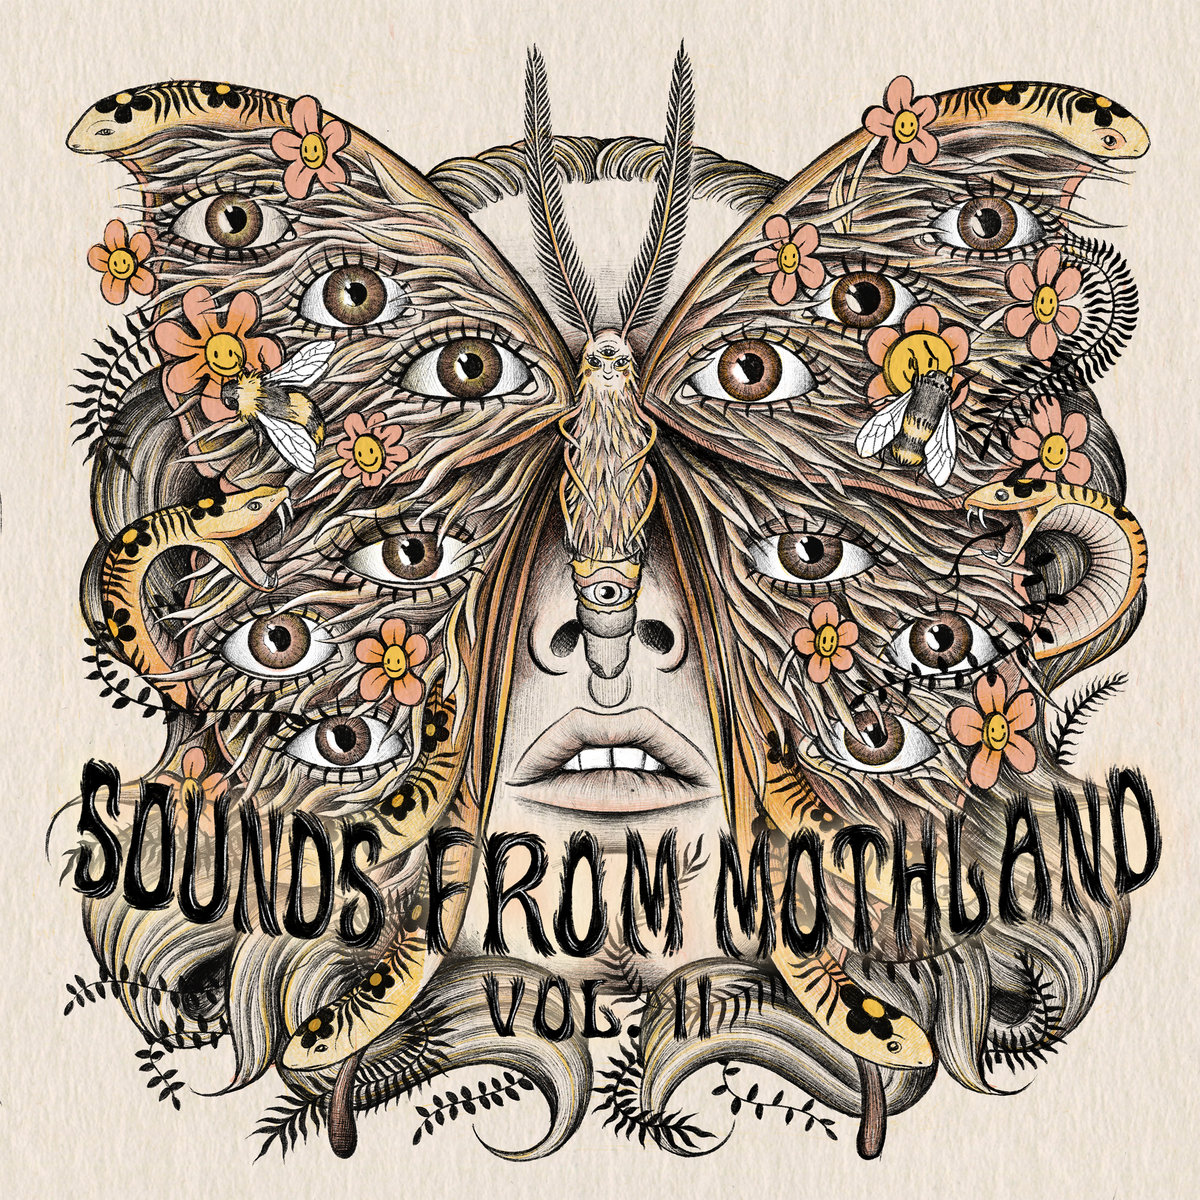 Sounds From Mothland, Vol. II review